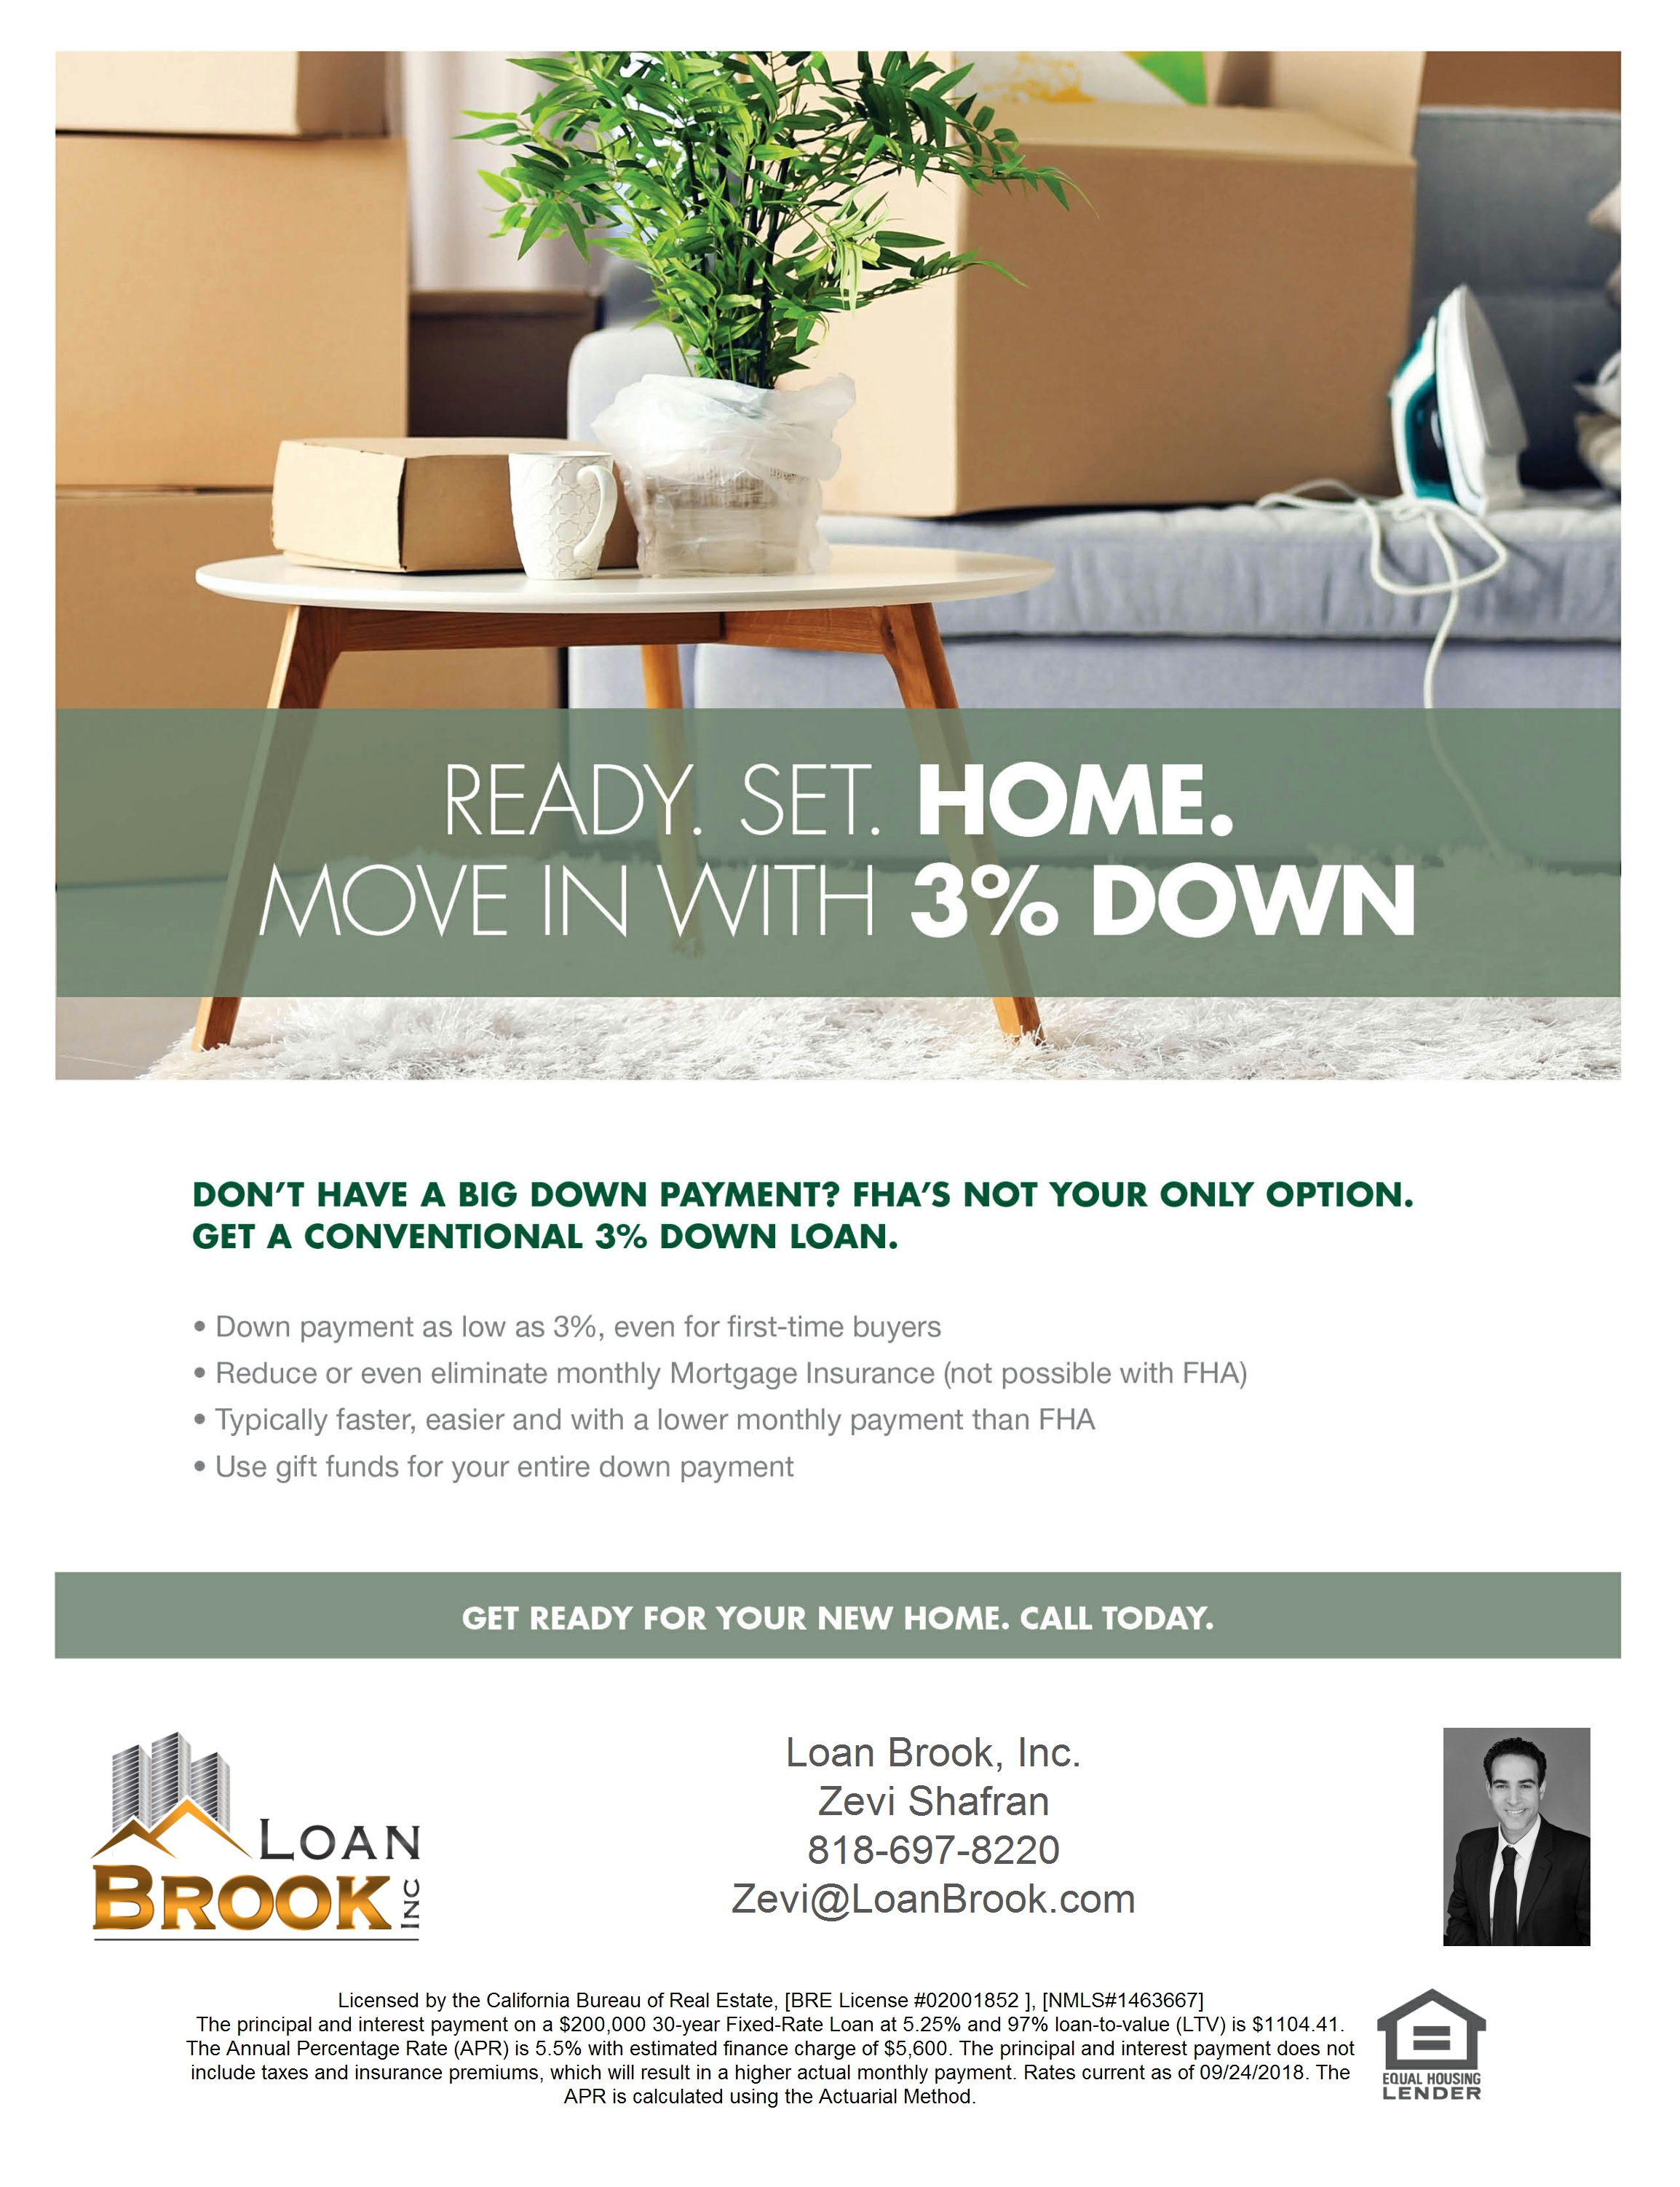 Move-In with 3% Down Payment